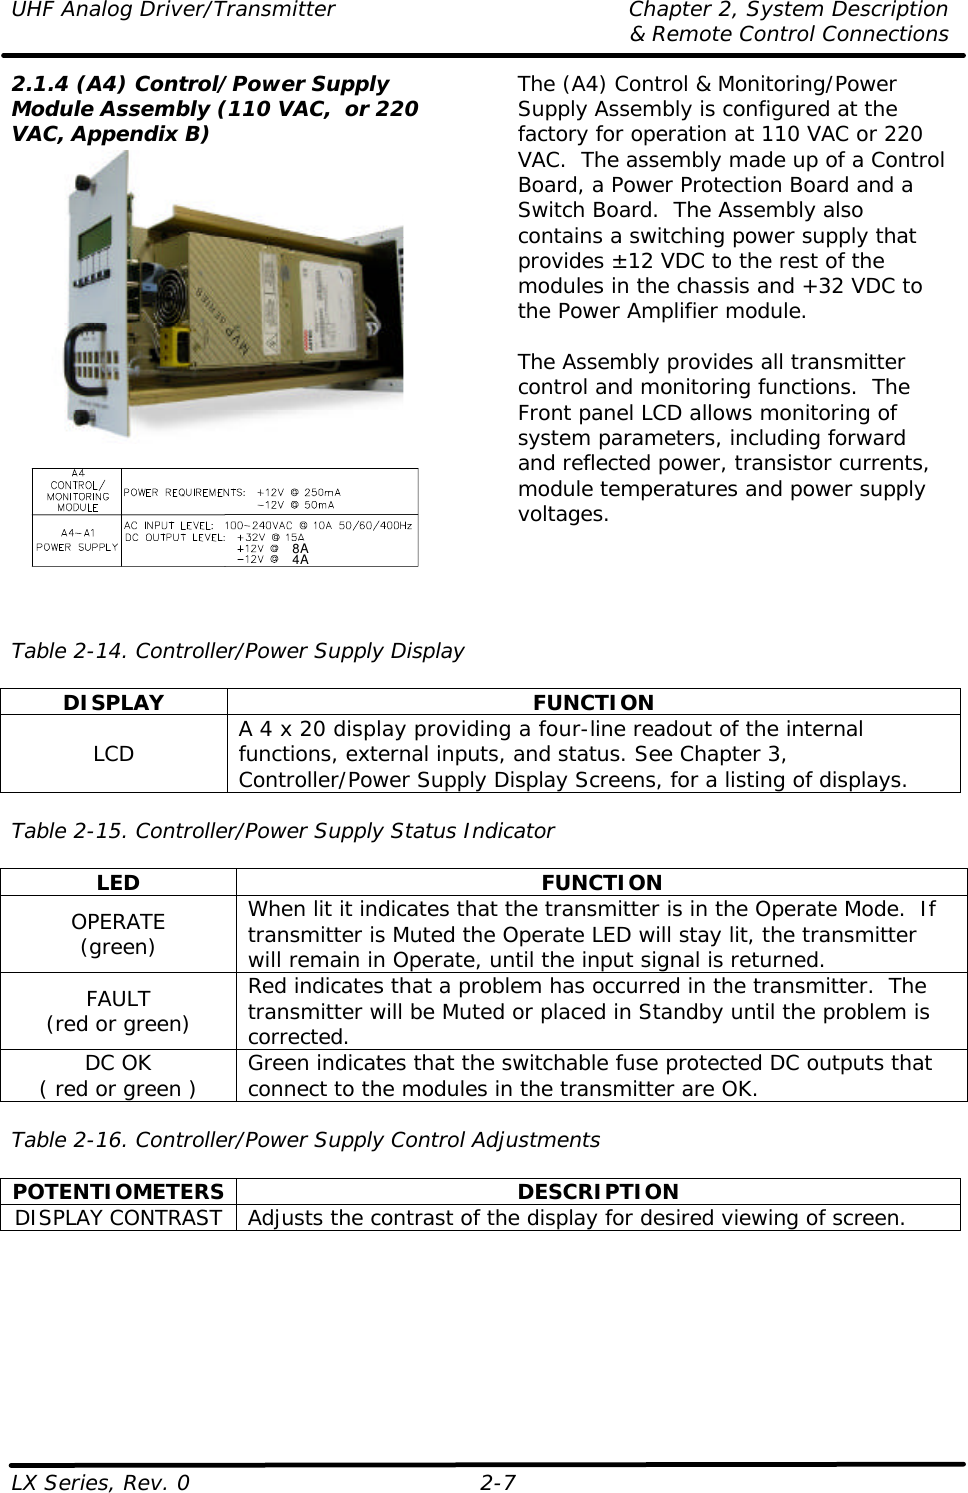 UHF Analog Driver/Transmitter Chapter 2, System Description  &amp; Remote Control Connections LX Series, Rev. 0 2-7 2.1.4 (A4) Control/Power Supply Module Assembly (110 VAC,  or 220 VAC, Appendix B)    8 A4 A  The (A4) Control &amp; Monitoring/Power Supply Assembly is configured at the factory for operation at 110 VAC or 220 VAC.  The assembly made up of a Control Board, a Power Protection Board and a Switch Board.  The Assembly also contains a switching power supply that provides ±12 VDC to the rest of the modules in the chassis and +32 VDC to the Power Amplifier module.  The Assembly provides all transmitter control and monitoring functions.  The Front panel LCD allows monitoring of system parameters, including forward and reflected power, transistor currents, module temperatures and power supply voltages.  Table 2-14. Controller/Power Supply Display  DISPLAY FUNCTION LCD A 4 x 20 display providing a four-line readout of the internal functions, external inputs, and status. See Chapter 3, Controller/Power Supply Display Screens, for a listing of displays.  Table 2-15. Controller/Power Supply Status Indicator  LED FUNCTION OPERATE (green) When lit it indicates that the transmitter is in the Operate Mode.  If transmitter is Muted the Operate LED will stay lit, the transmitter will remain in Operate, until the input signal is returned. FAULT (red or green) Red indicates that a problem has occurred in the transmitter.  The transmitter will be Muted or placed in Standby until the problem is corrected. DC OK ( red or green ) Green indicates that the switchable fuse protected DC outputs that connect to the modules in the transmitter are OK.  Table 2-16. Controller/Power Supply Control Adjustments  POTENTIOMETERS DESCRIPTION DISPLAY CONTRAST Adjusts the contrast of the display for desired viewing of screen.  